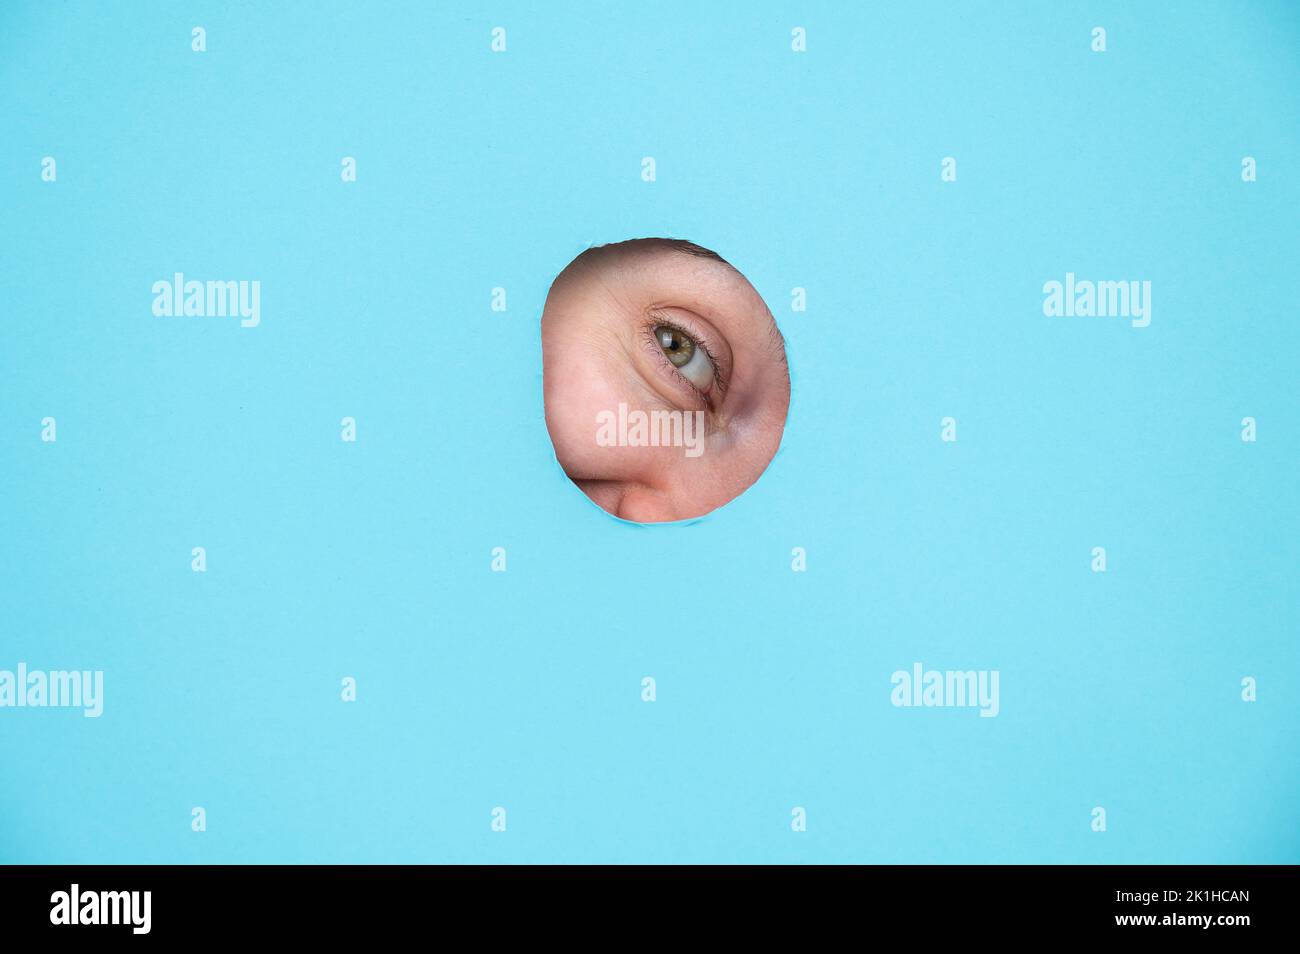 Woman peeking out of hole in blue paper background.  Stock Photo